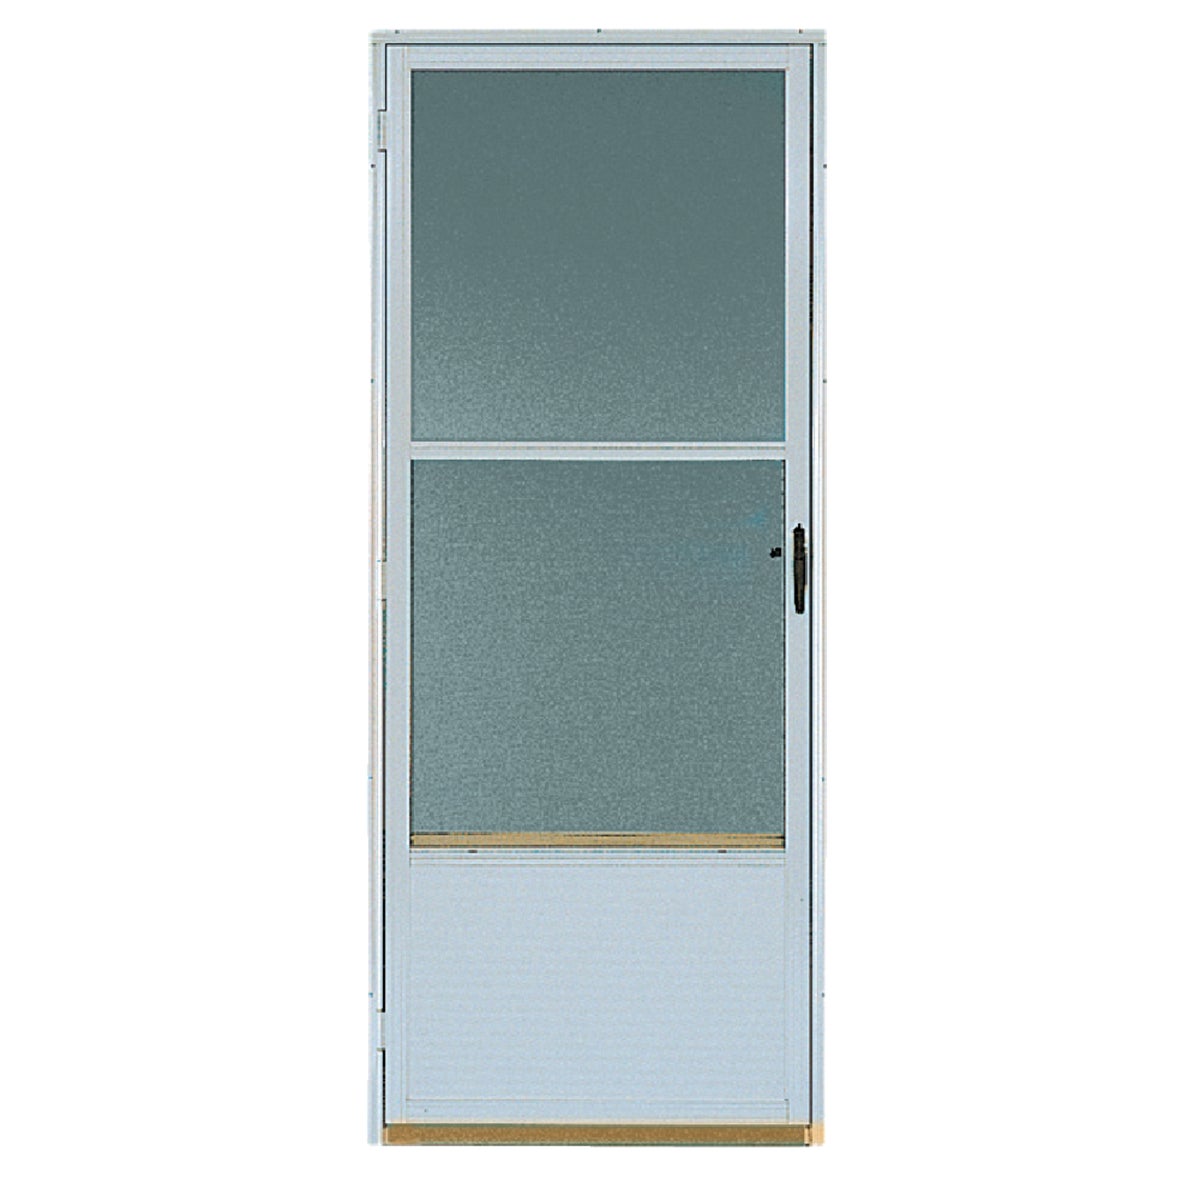 Item 175884, Heavy-duty aluminum storm door that adds quality protection to any home.